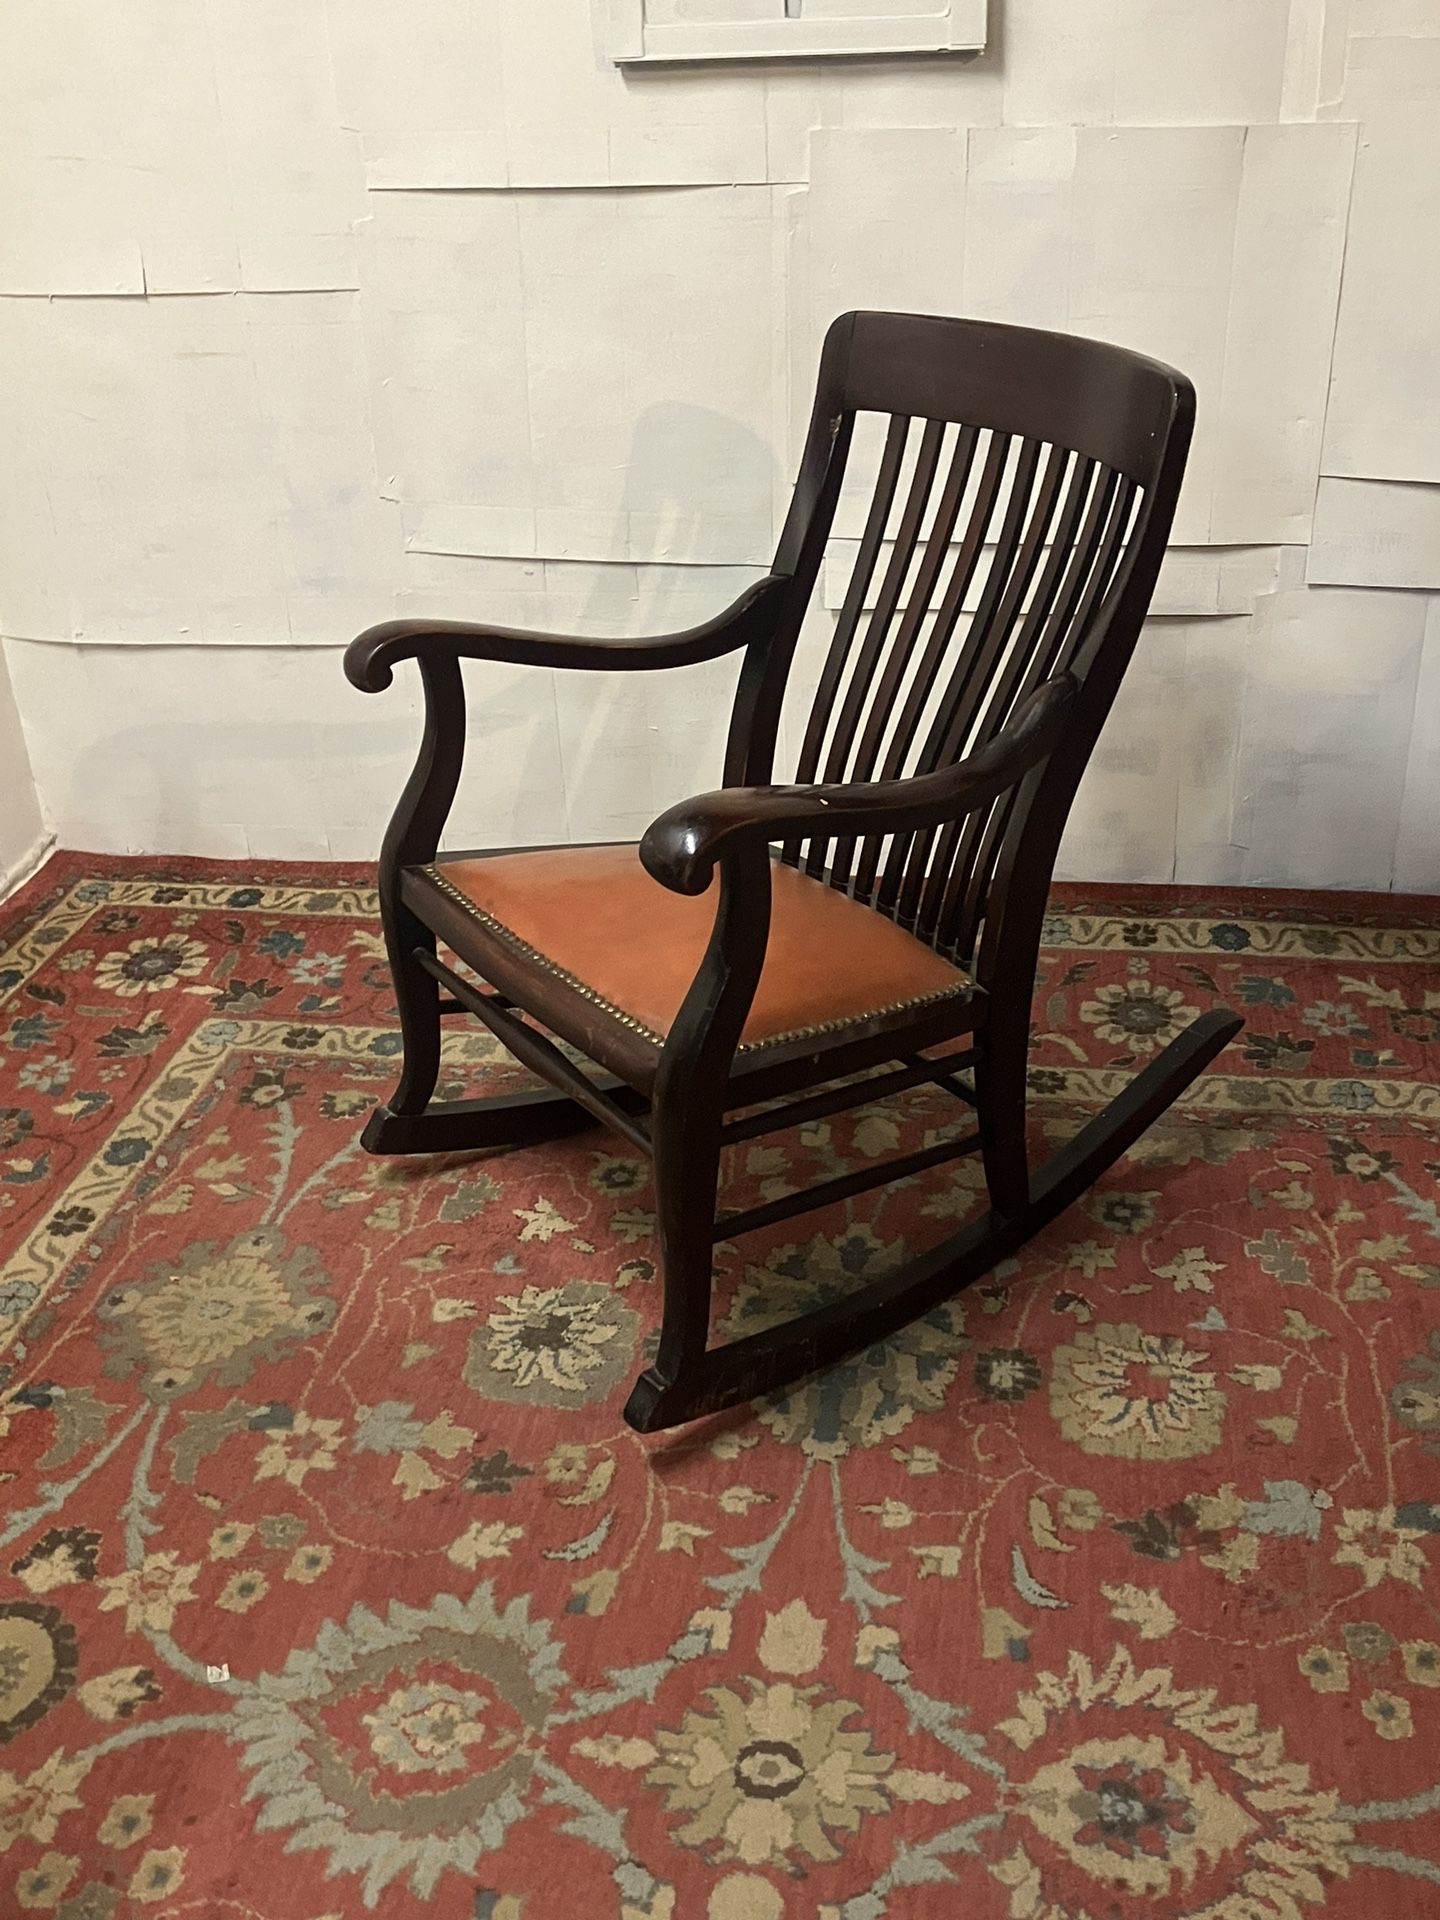 Early 1900’s Rocking Chair with Curved Spindles